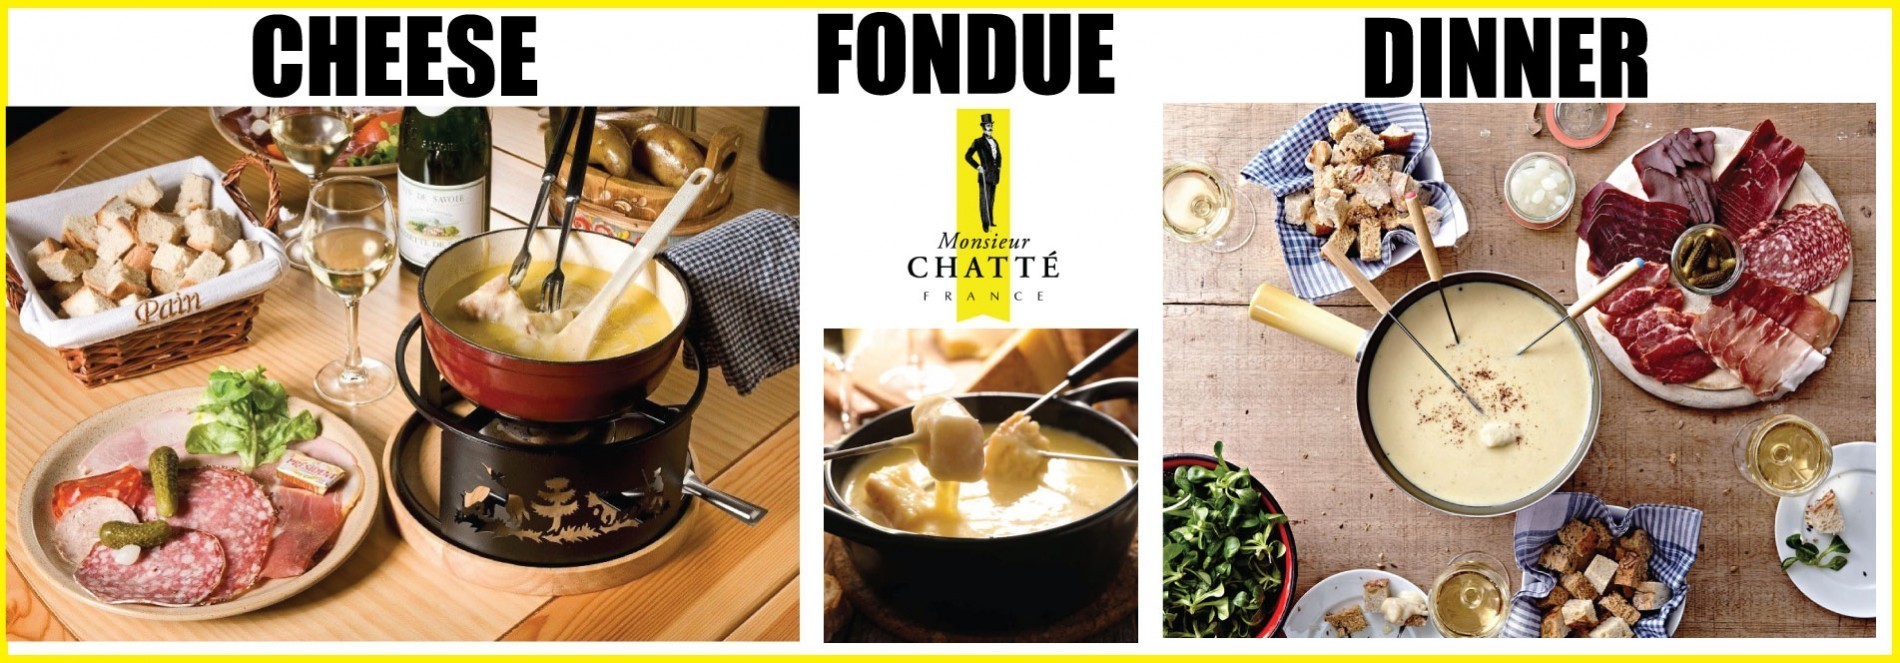 FONDUE CHEESE DINNER for 2 px